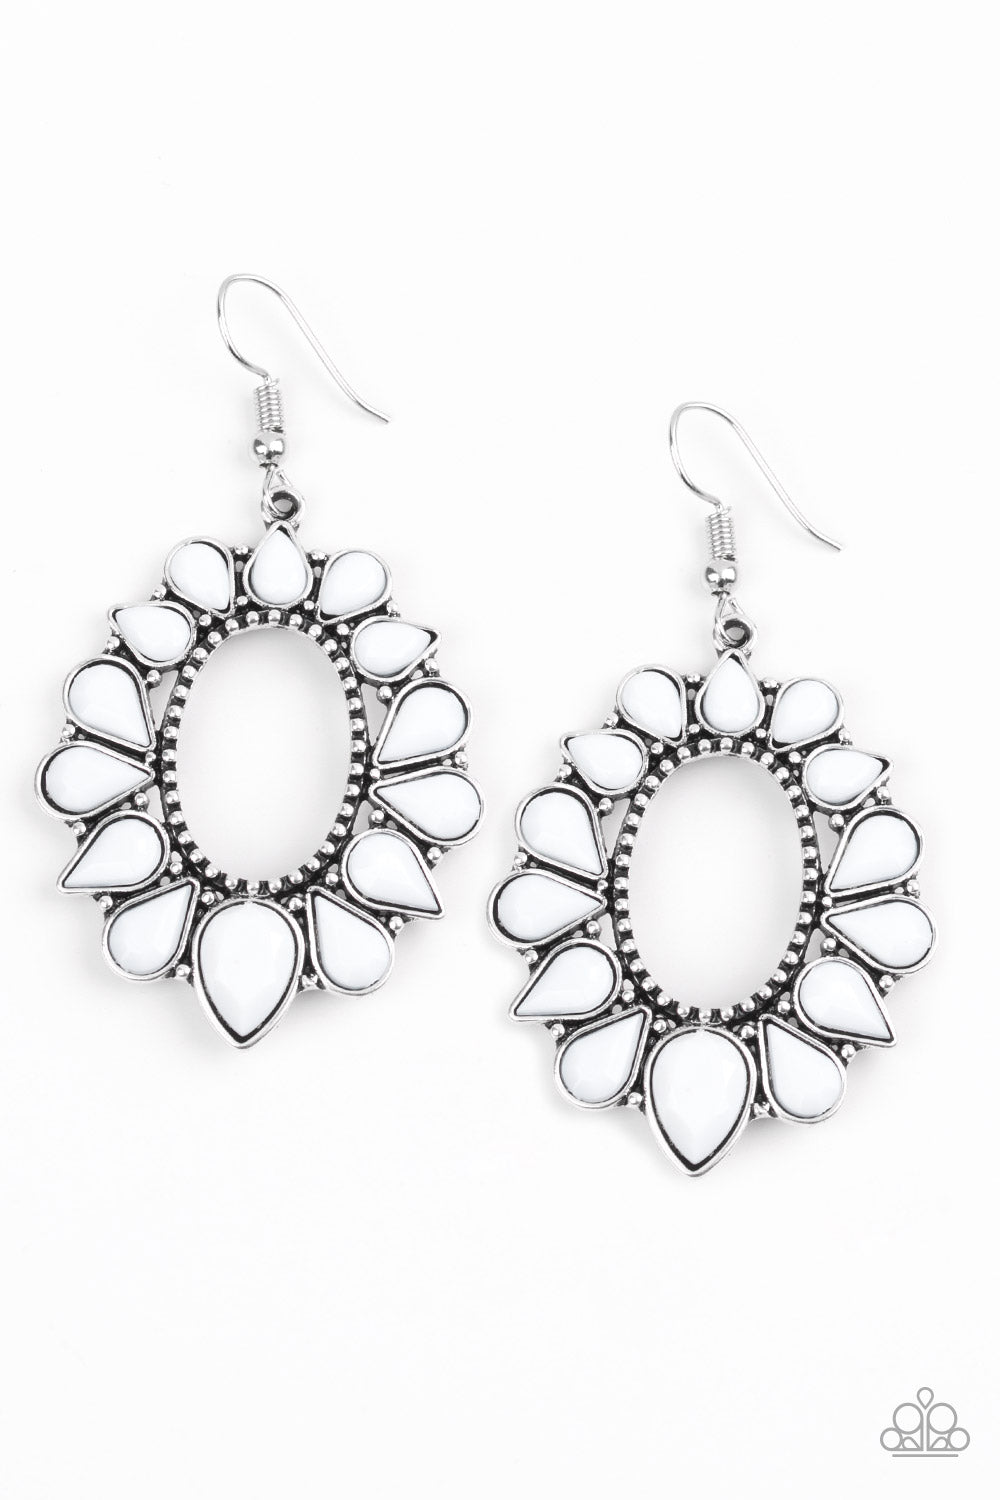 Paparazzi Accessories Fashionista Flavor White Earrings - Lady T Accessories